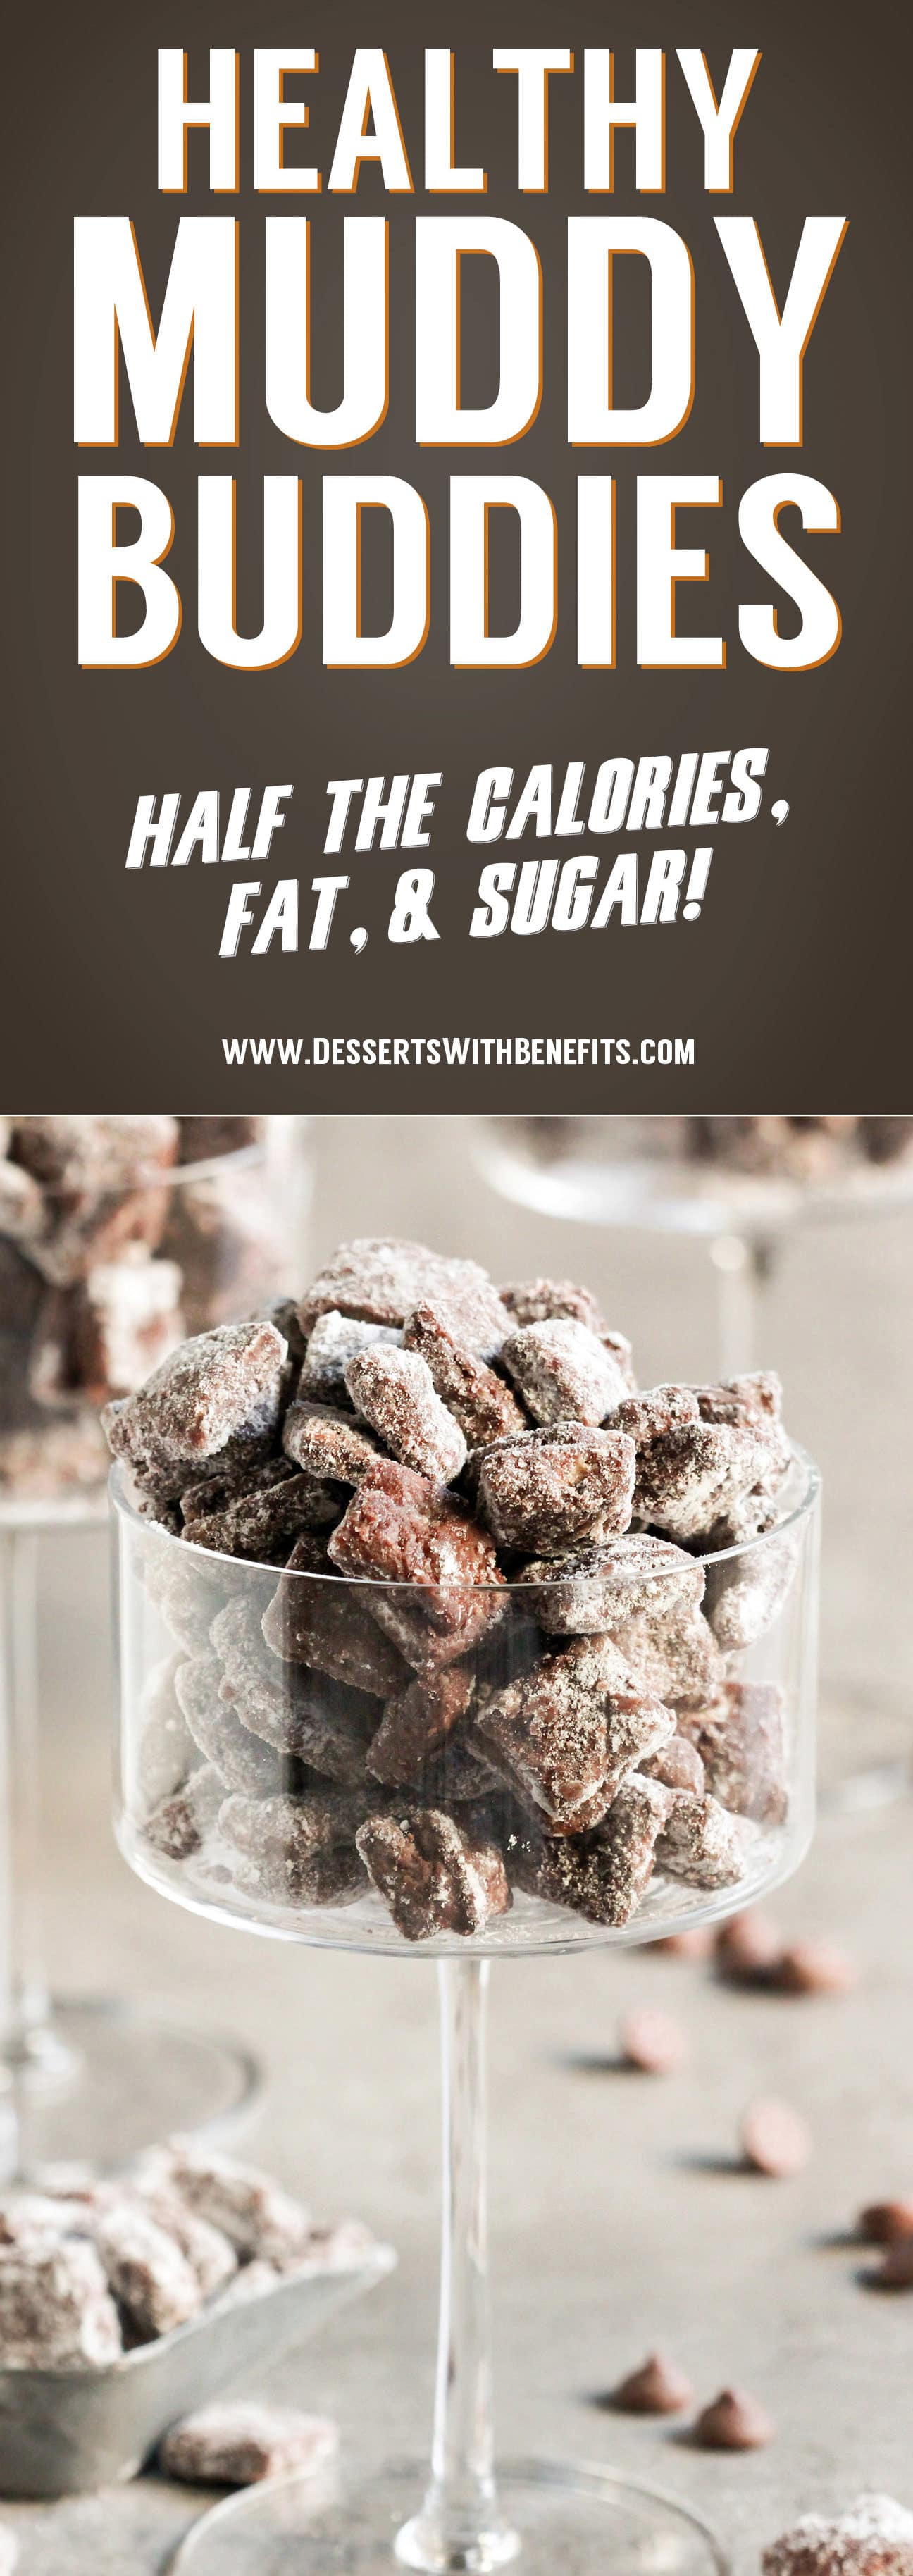 These Healthy Muddy Buddies (or Healthy Puppy Chow, whatever you like to call it!) are the PERFECT snack! Crunchy, sweet, chocolatey, peanut buttery, and delicious. You’d never know it’s got half the calories and fat as the original, a fraction of the sugar, and is dairy free and vegan too! Healthy Dessert Recipes at the Desserts With Benefits Blog (www.DessertsWithBenefits.com)